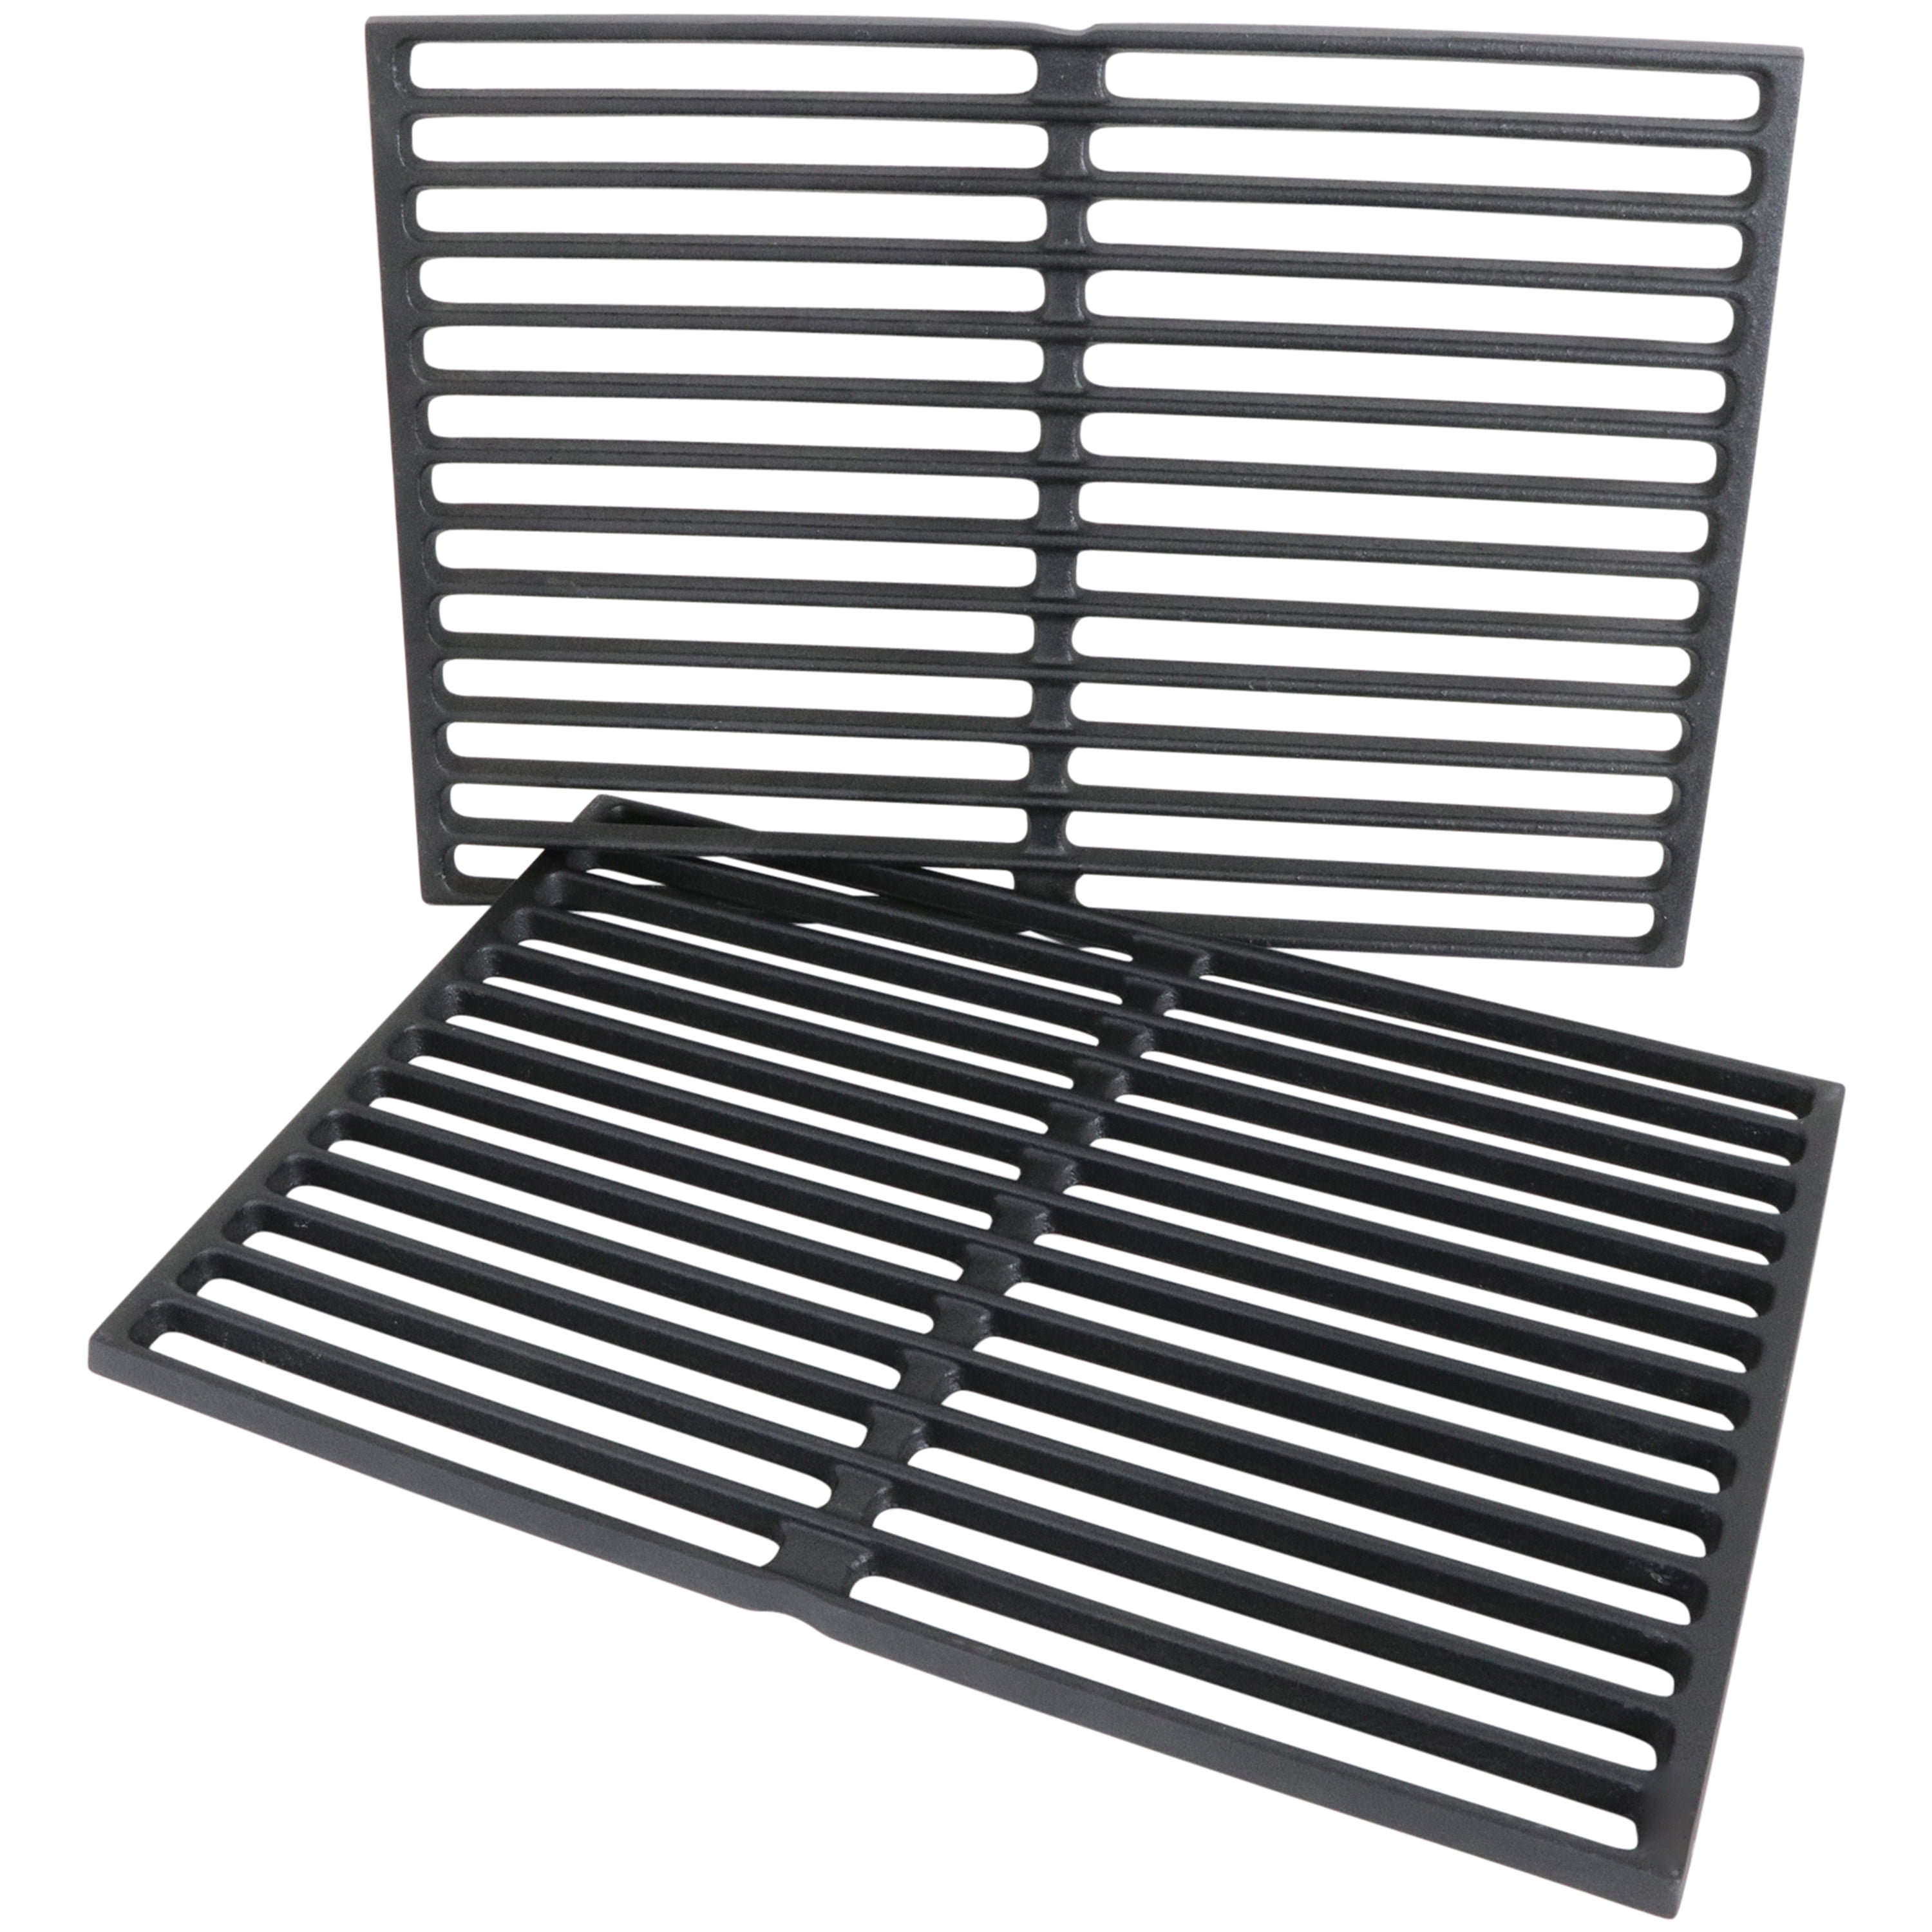 Heavy Duty Porcelain Enameled Grates Replacement for Weber Genesis Silver BBQ 